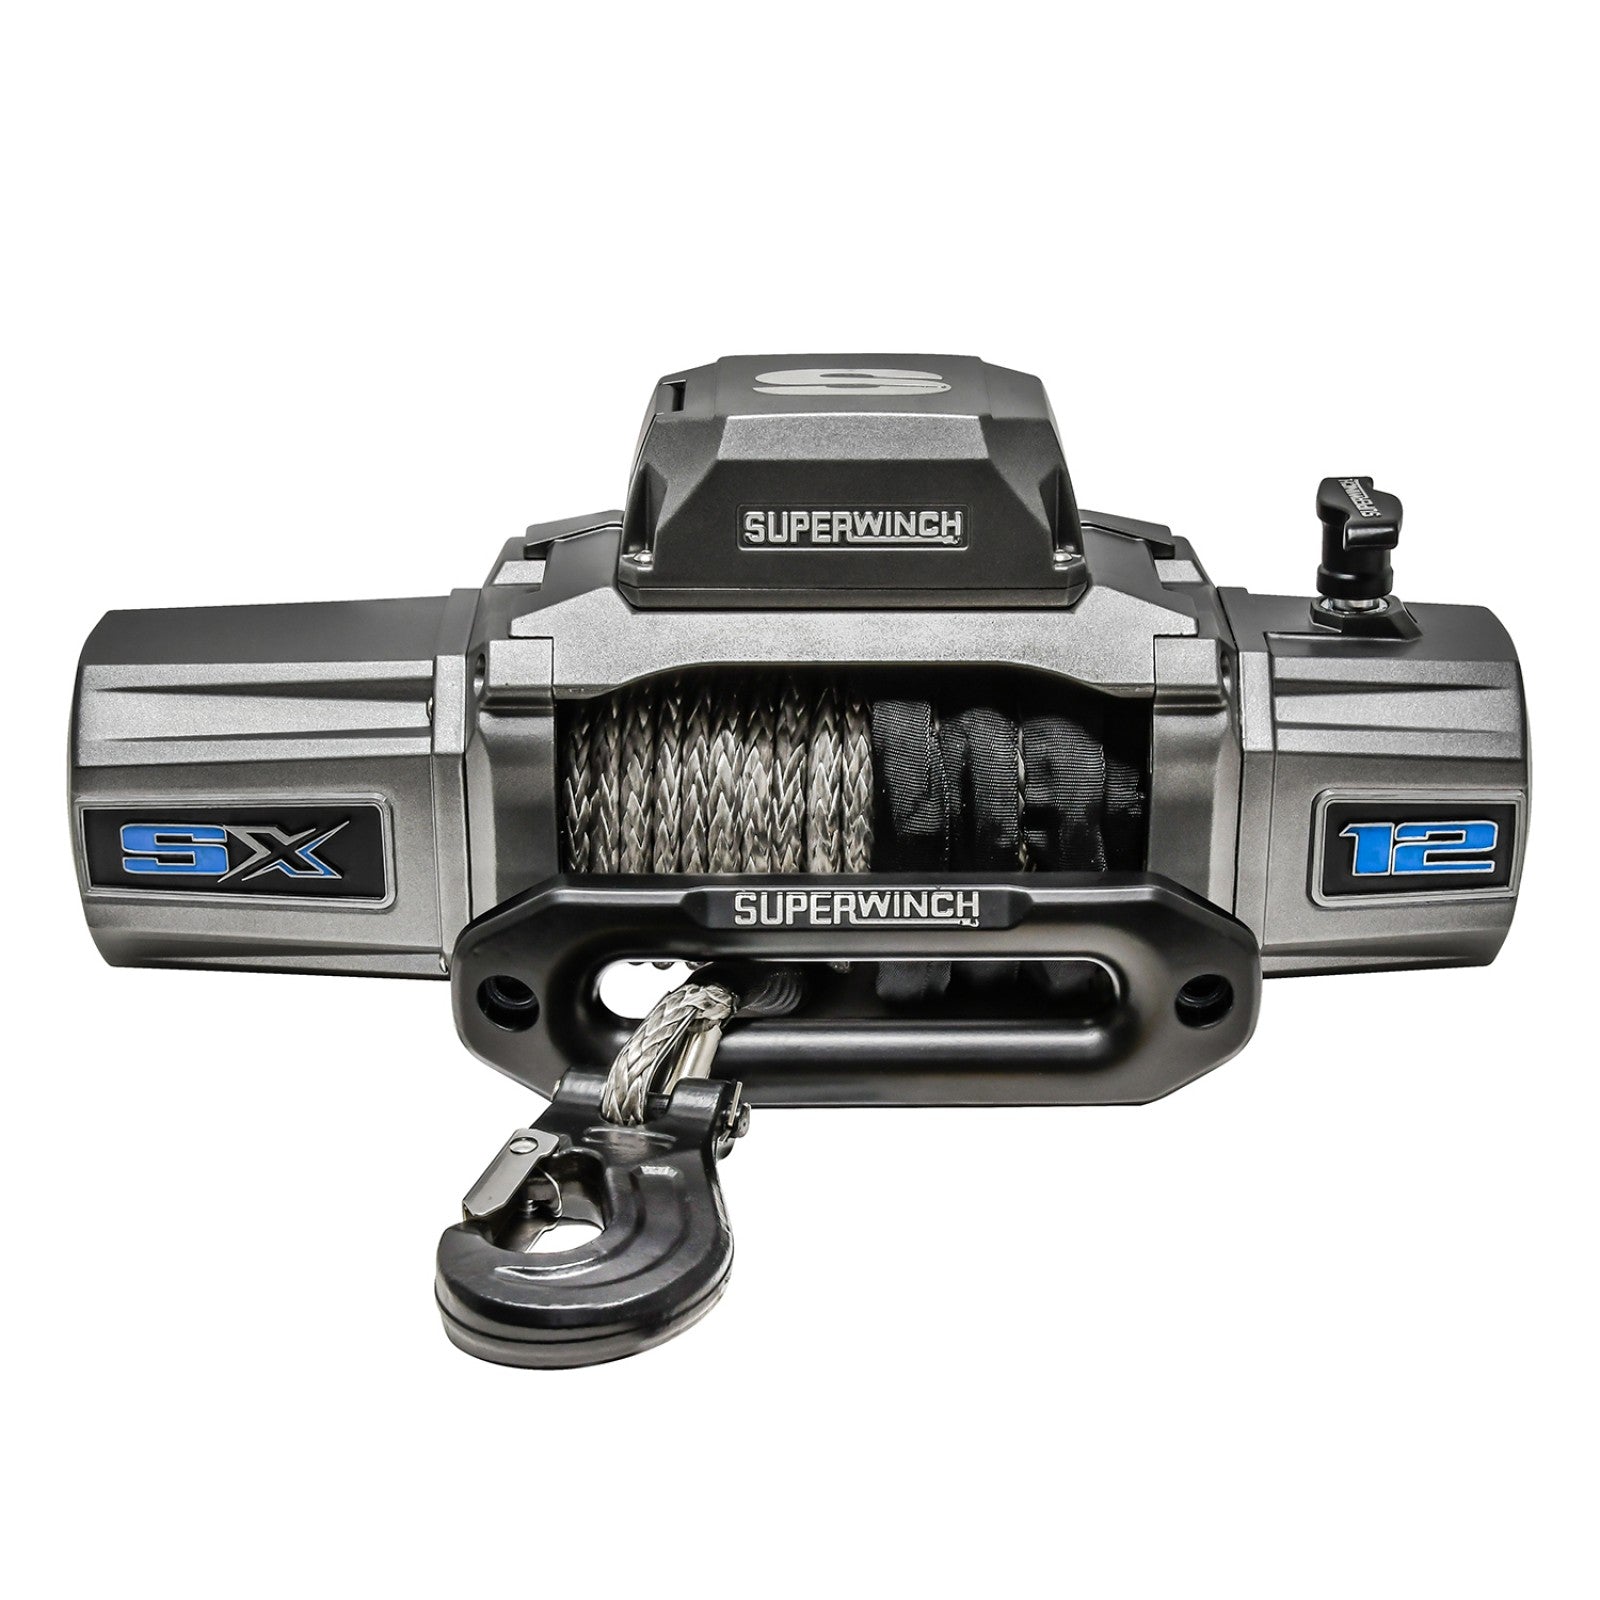 Superwinch SX Winch - 12,000 lbs - Synthetic Rope 1712201